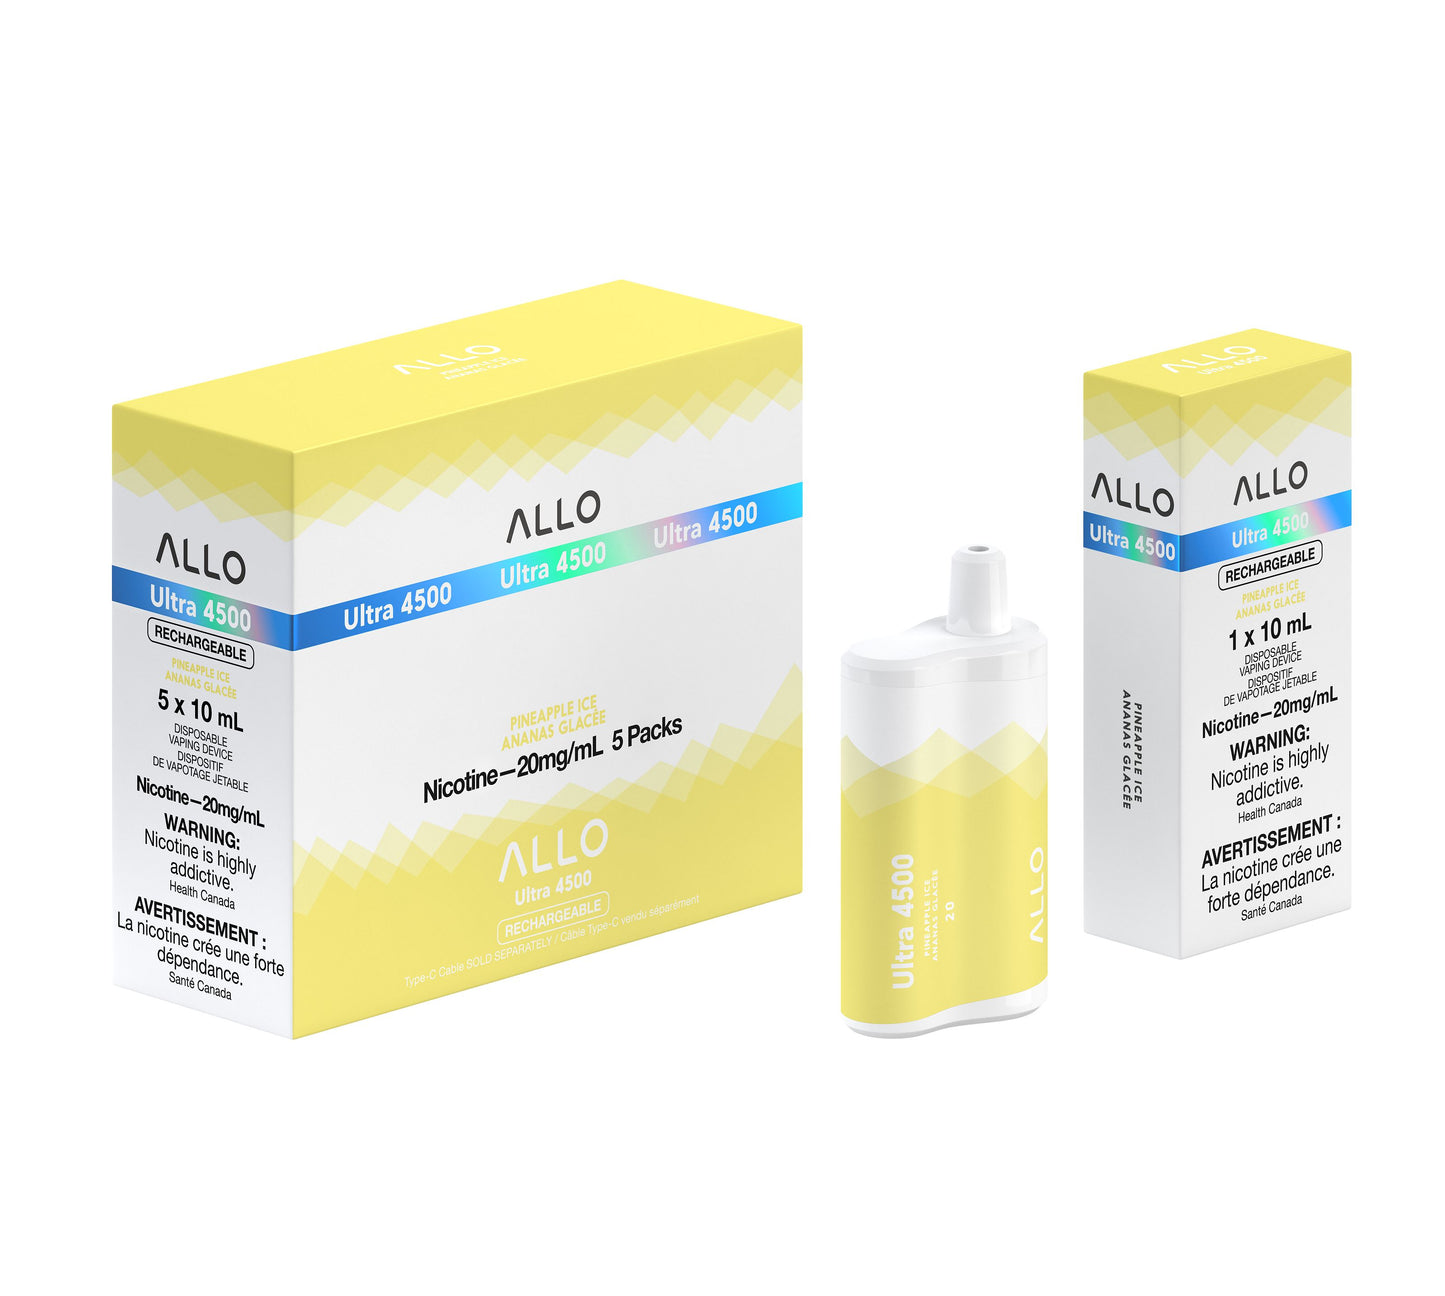 Load image into Gallery viewer, Pineapple Ice - Allo 4500 Disposable Allo 4500 
